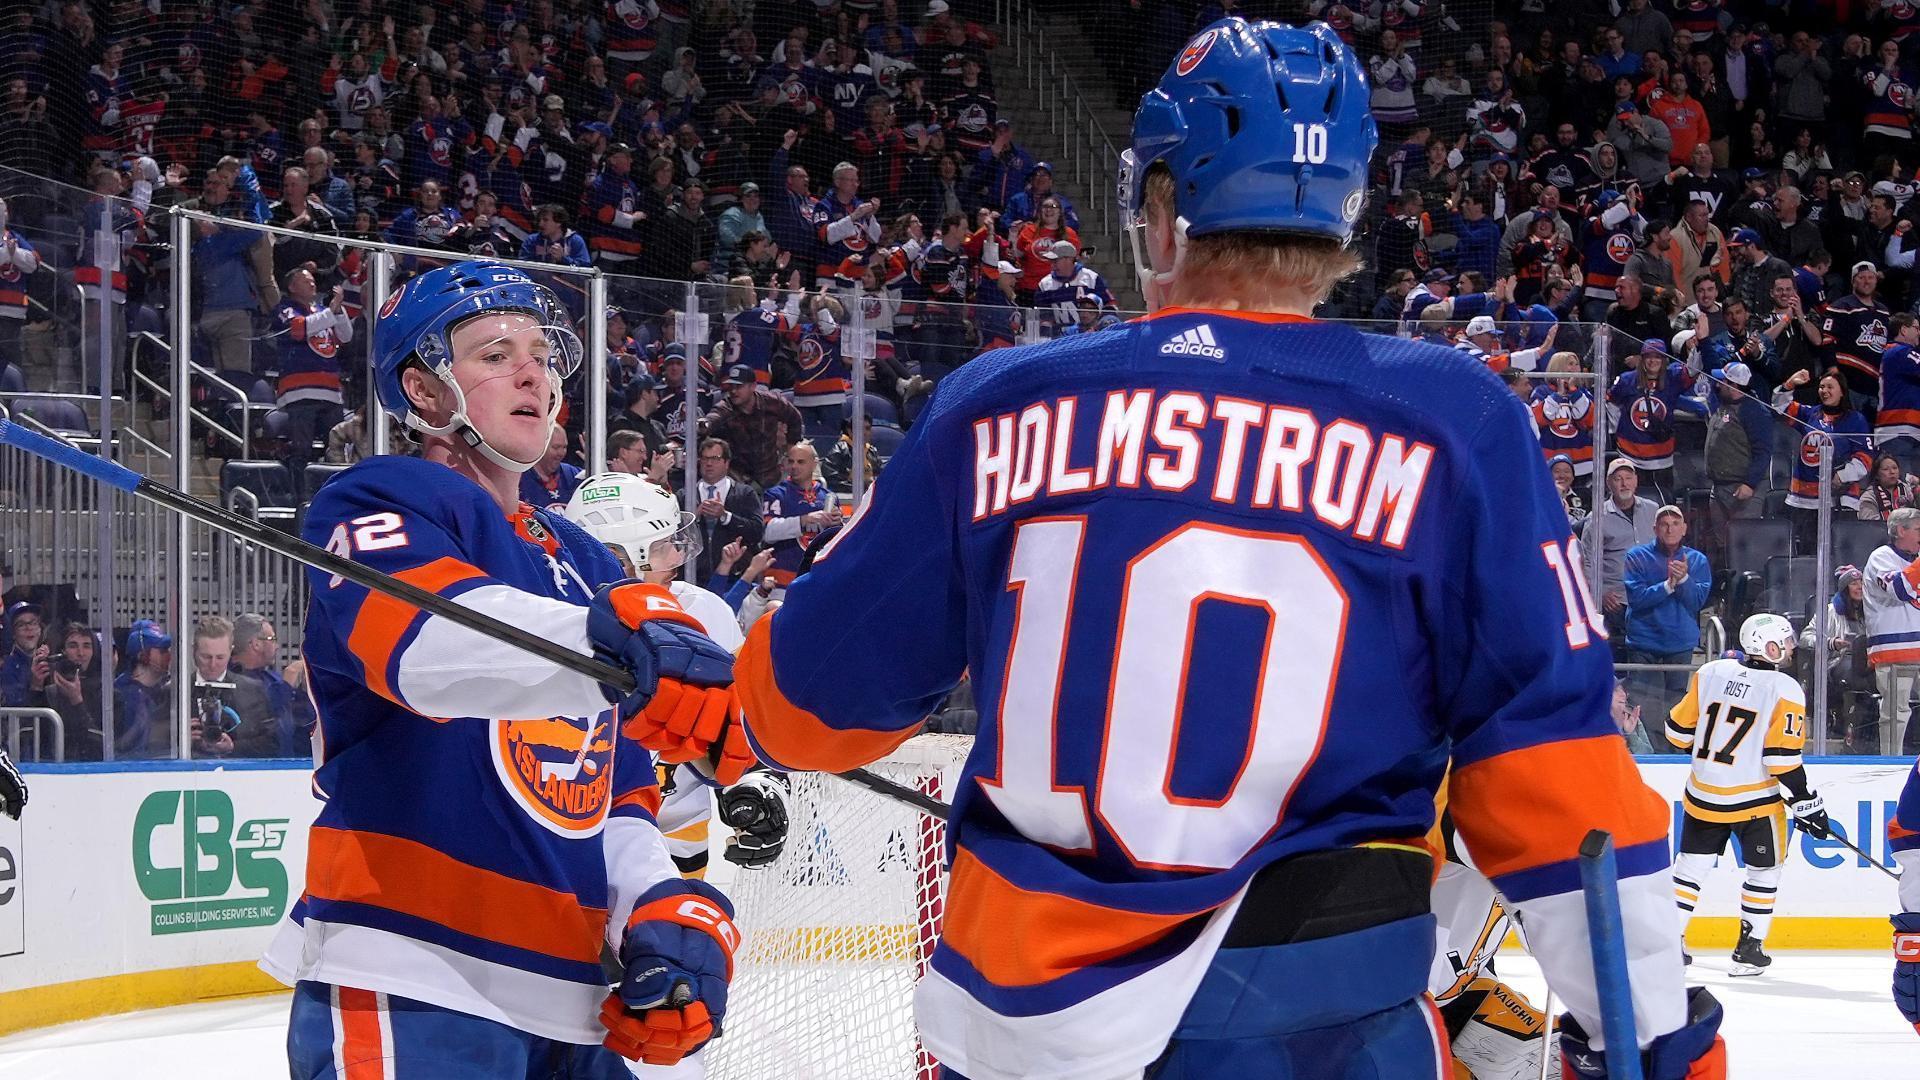 Simon Holmstrom roofs the winning goal for the Islanders